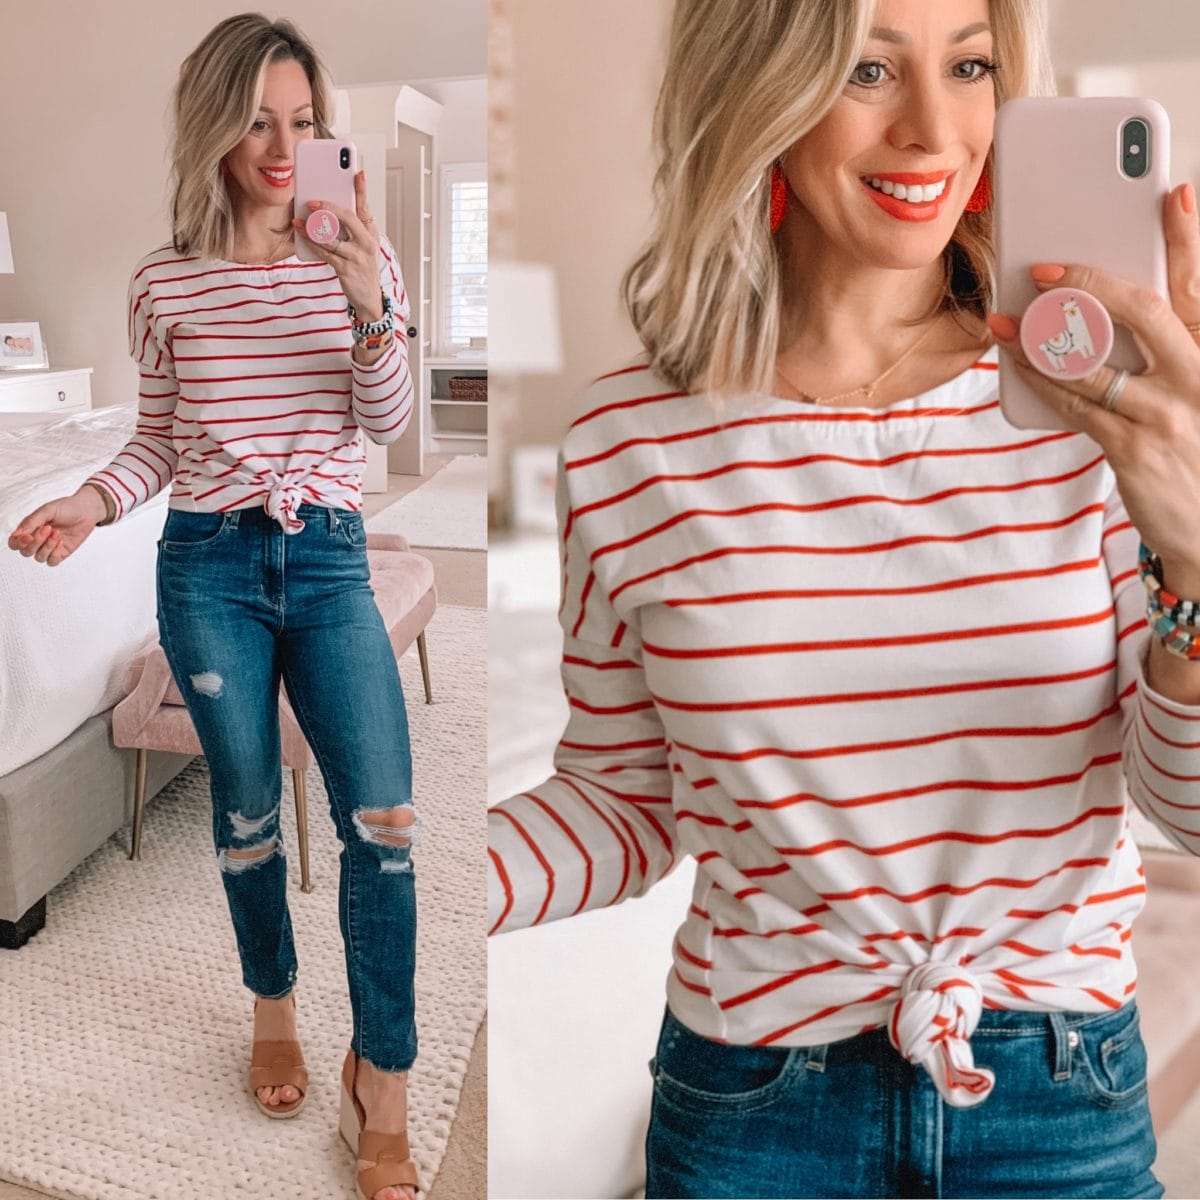 Red and White Stripe Top, Distressed Skinny Jeans, Wedges, Enamel bracelets